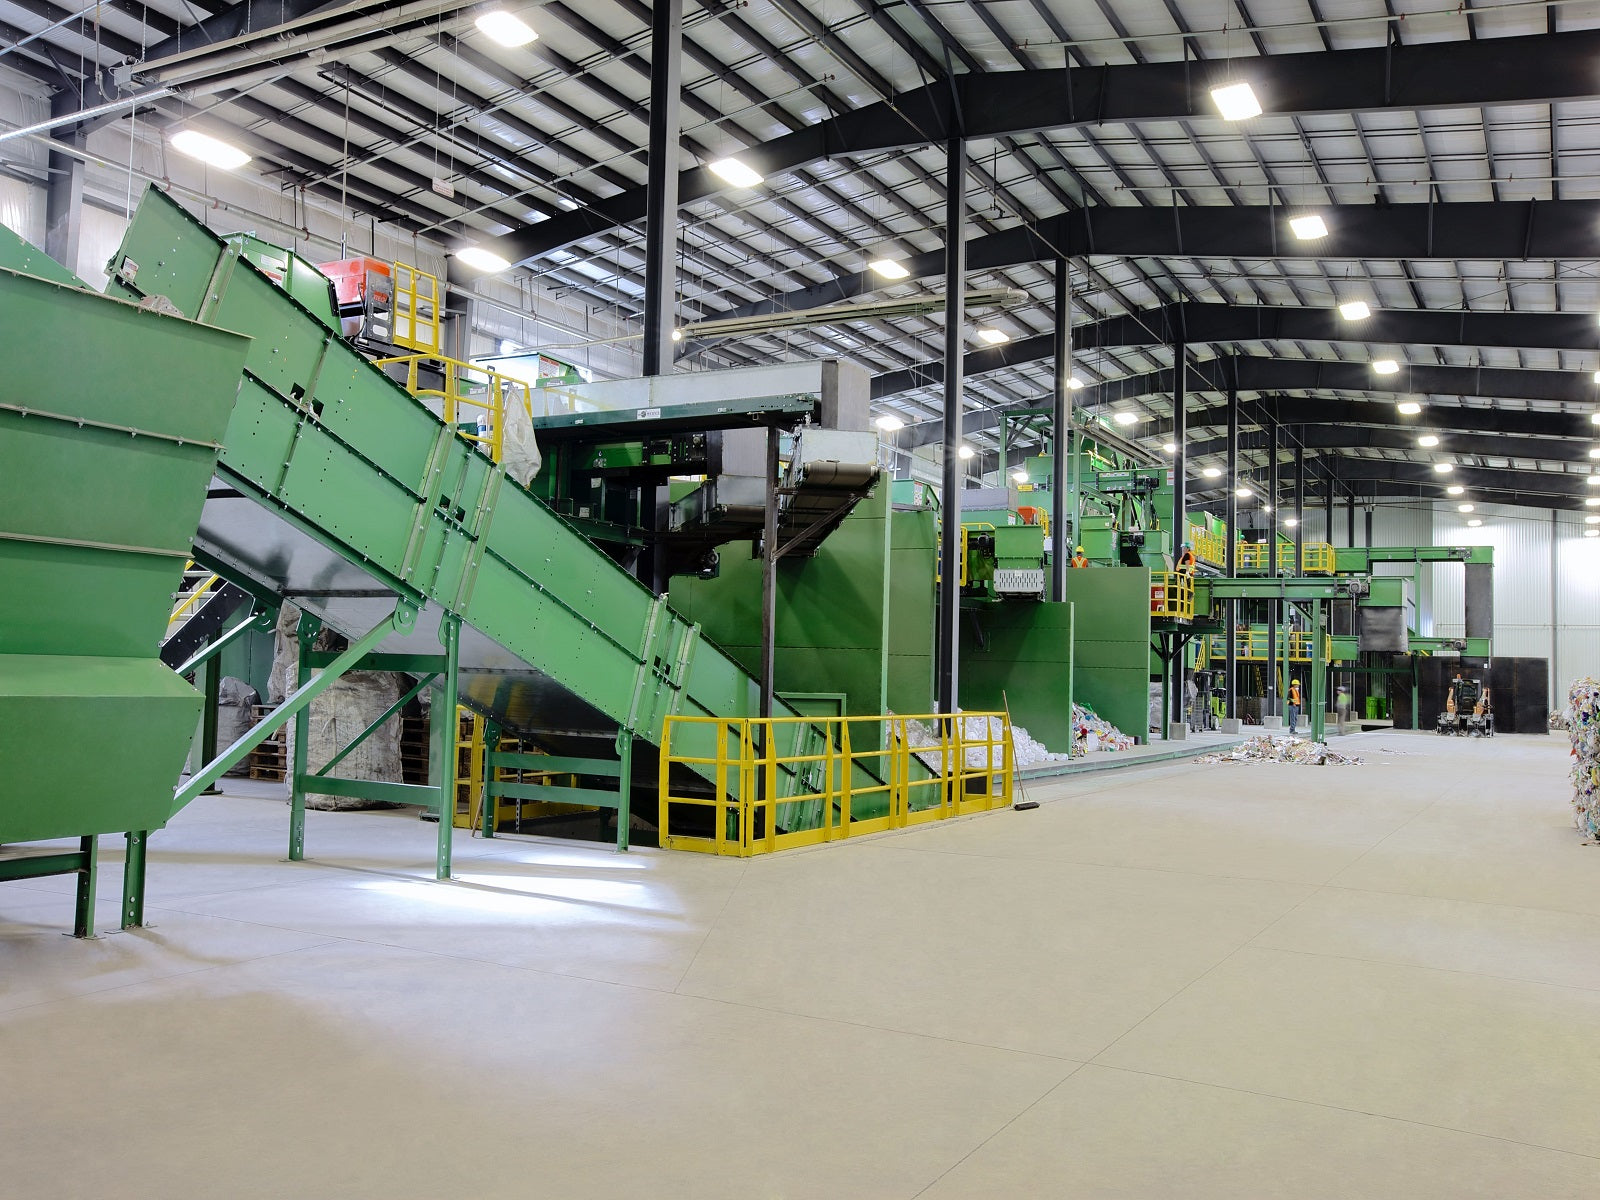 Two Ontario Material Recovery Facilities undergo extensive upgrades